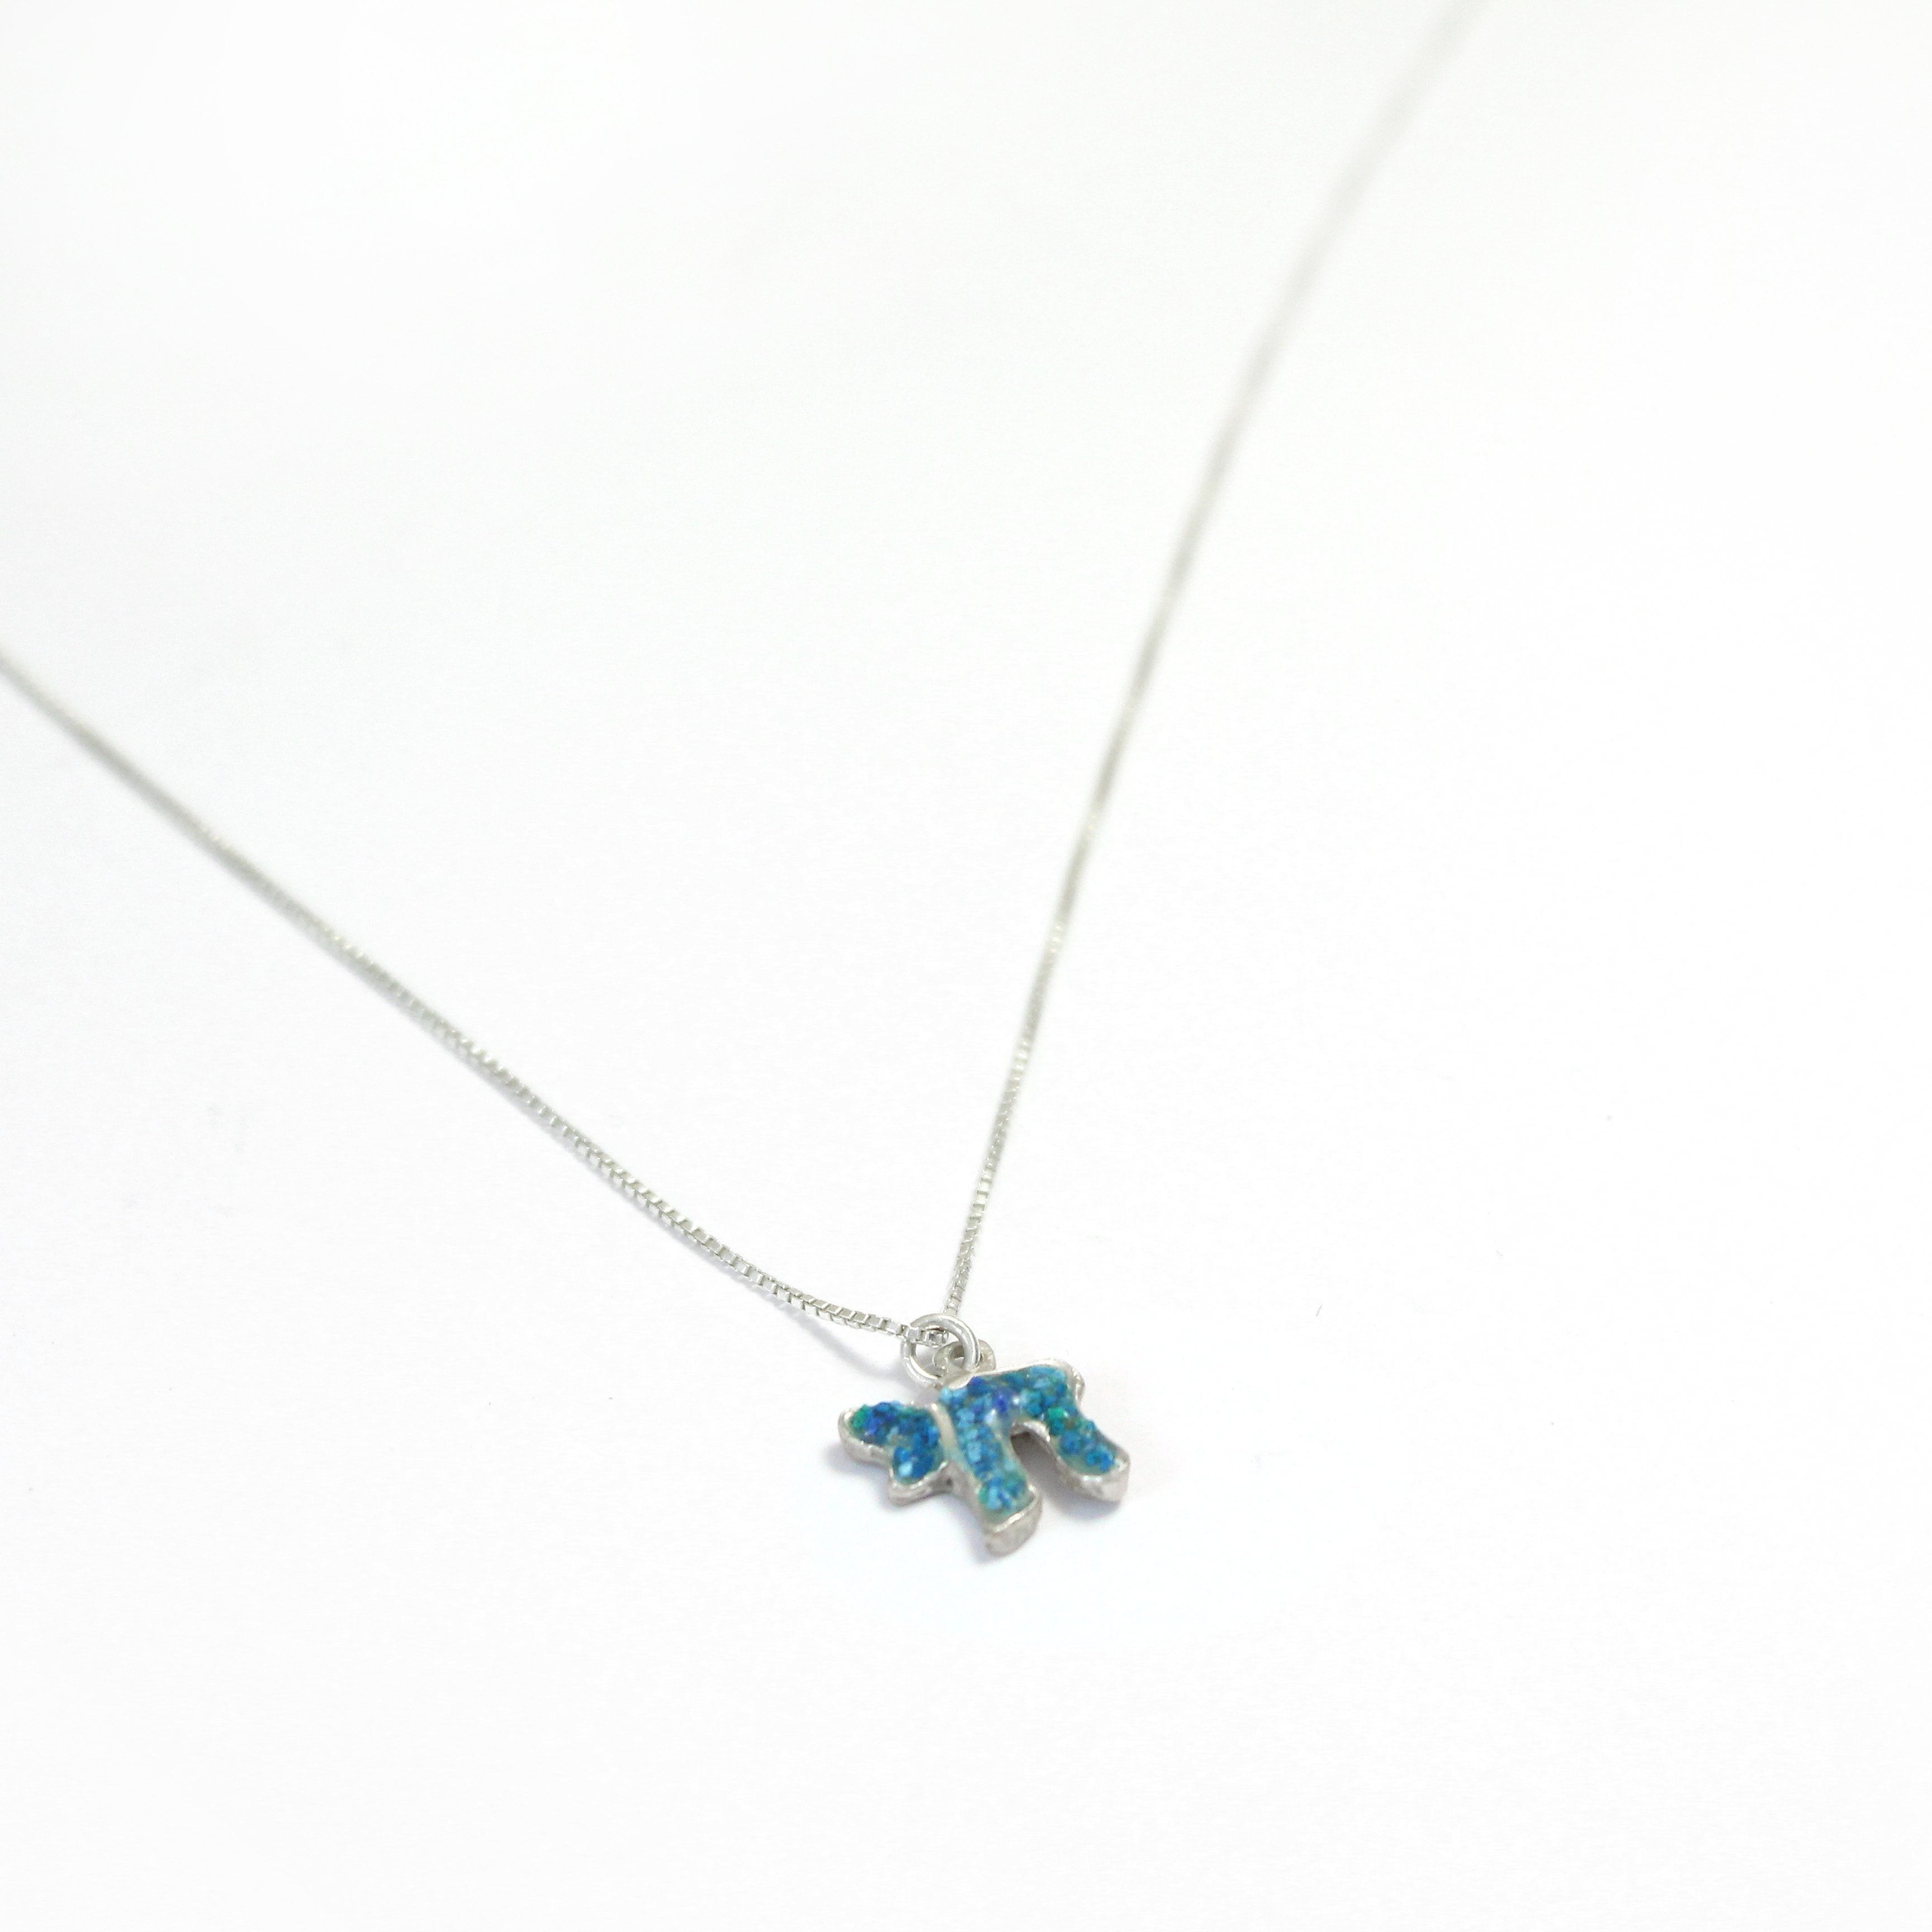 Small Turquoise Chai Necklace with stones - Shulamit Kanter